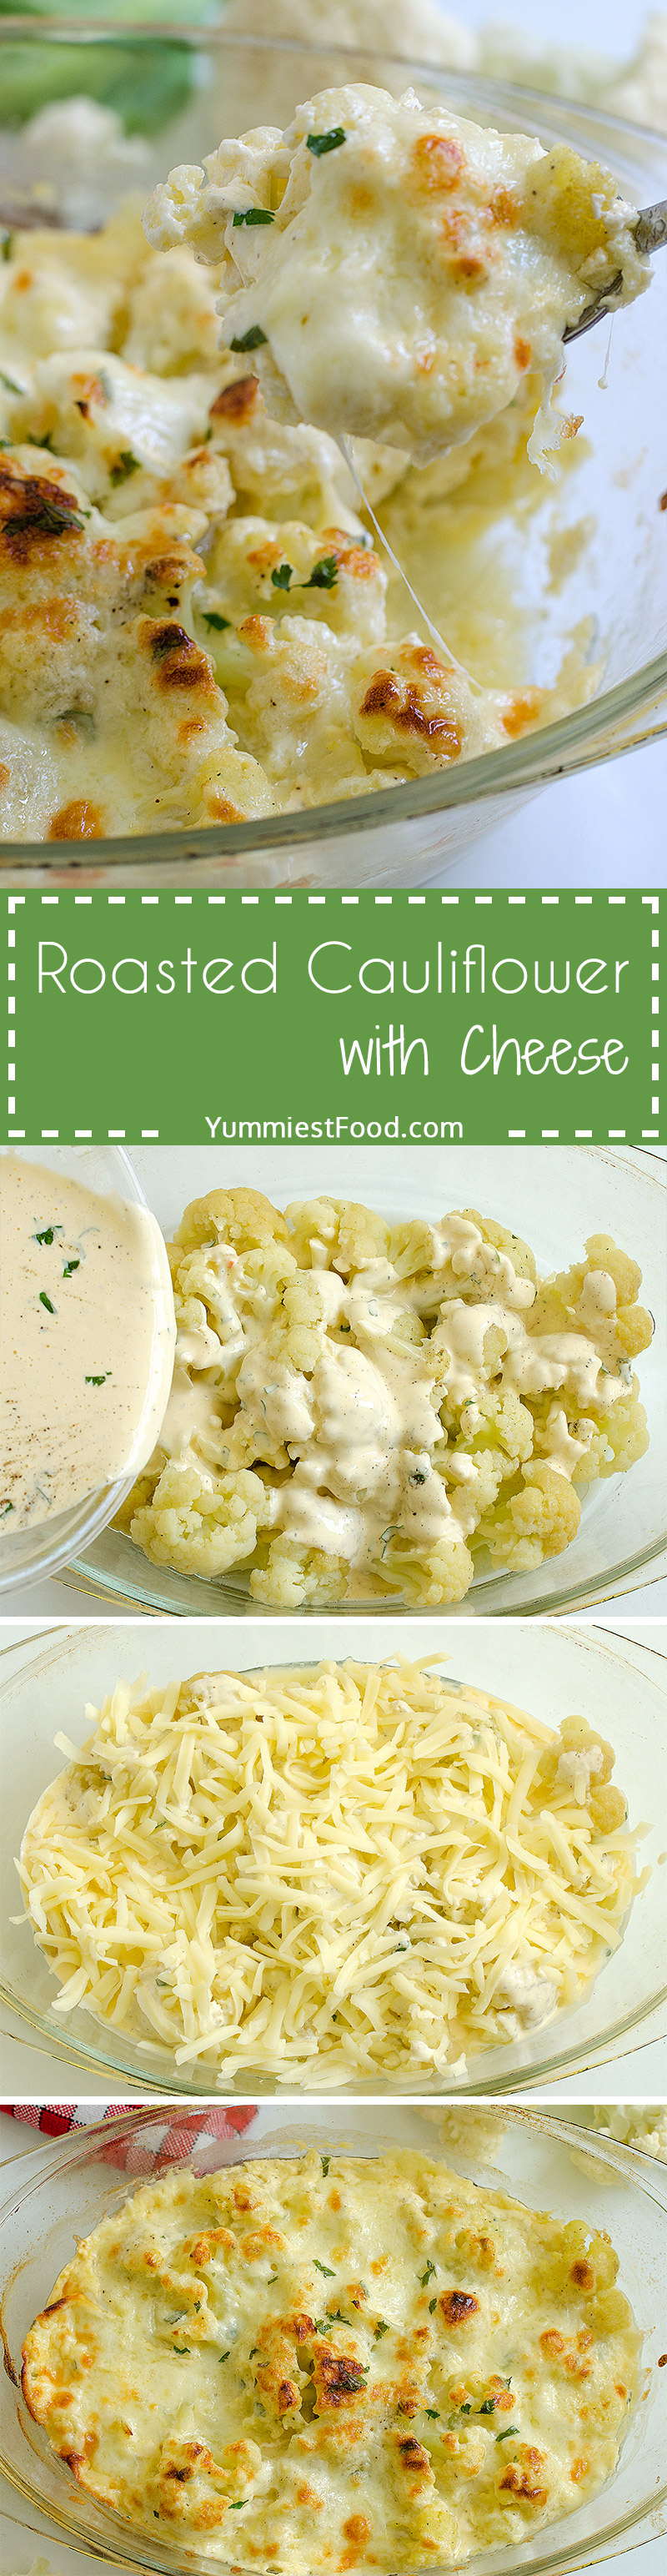 Roasted Cauliflower with Cheese - light, healthy, delicious and quick dish